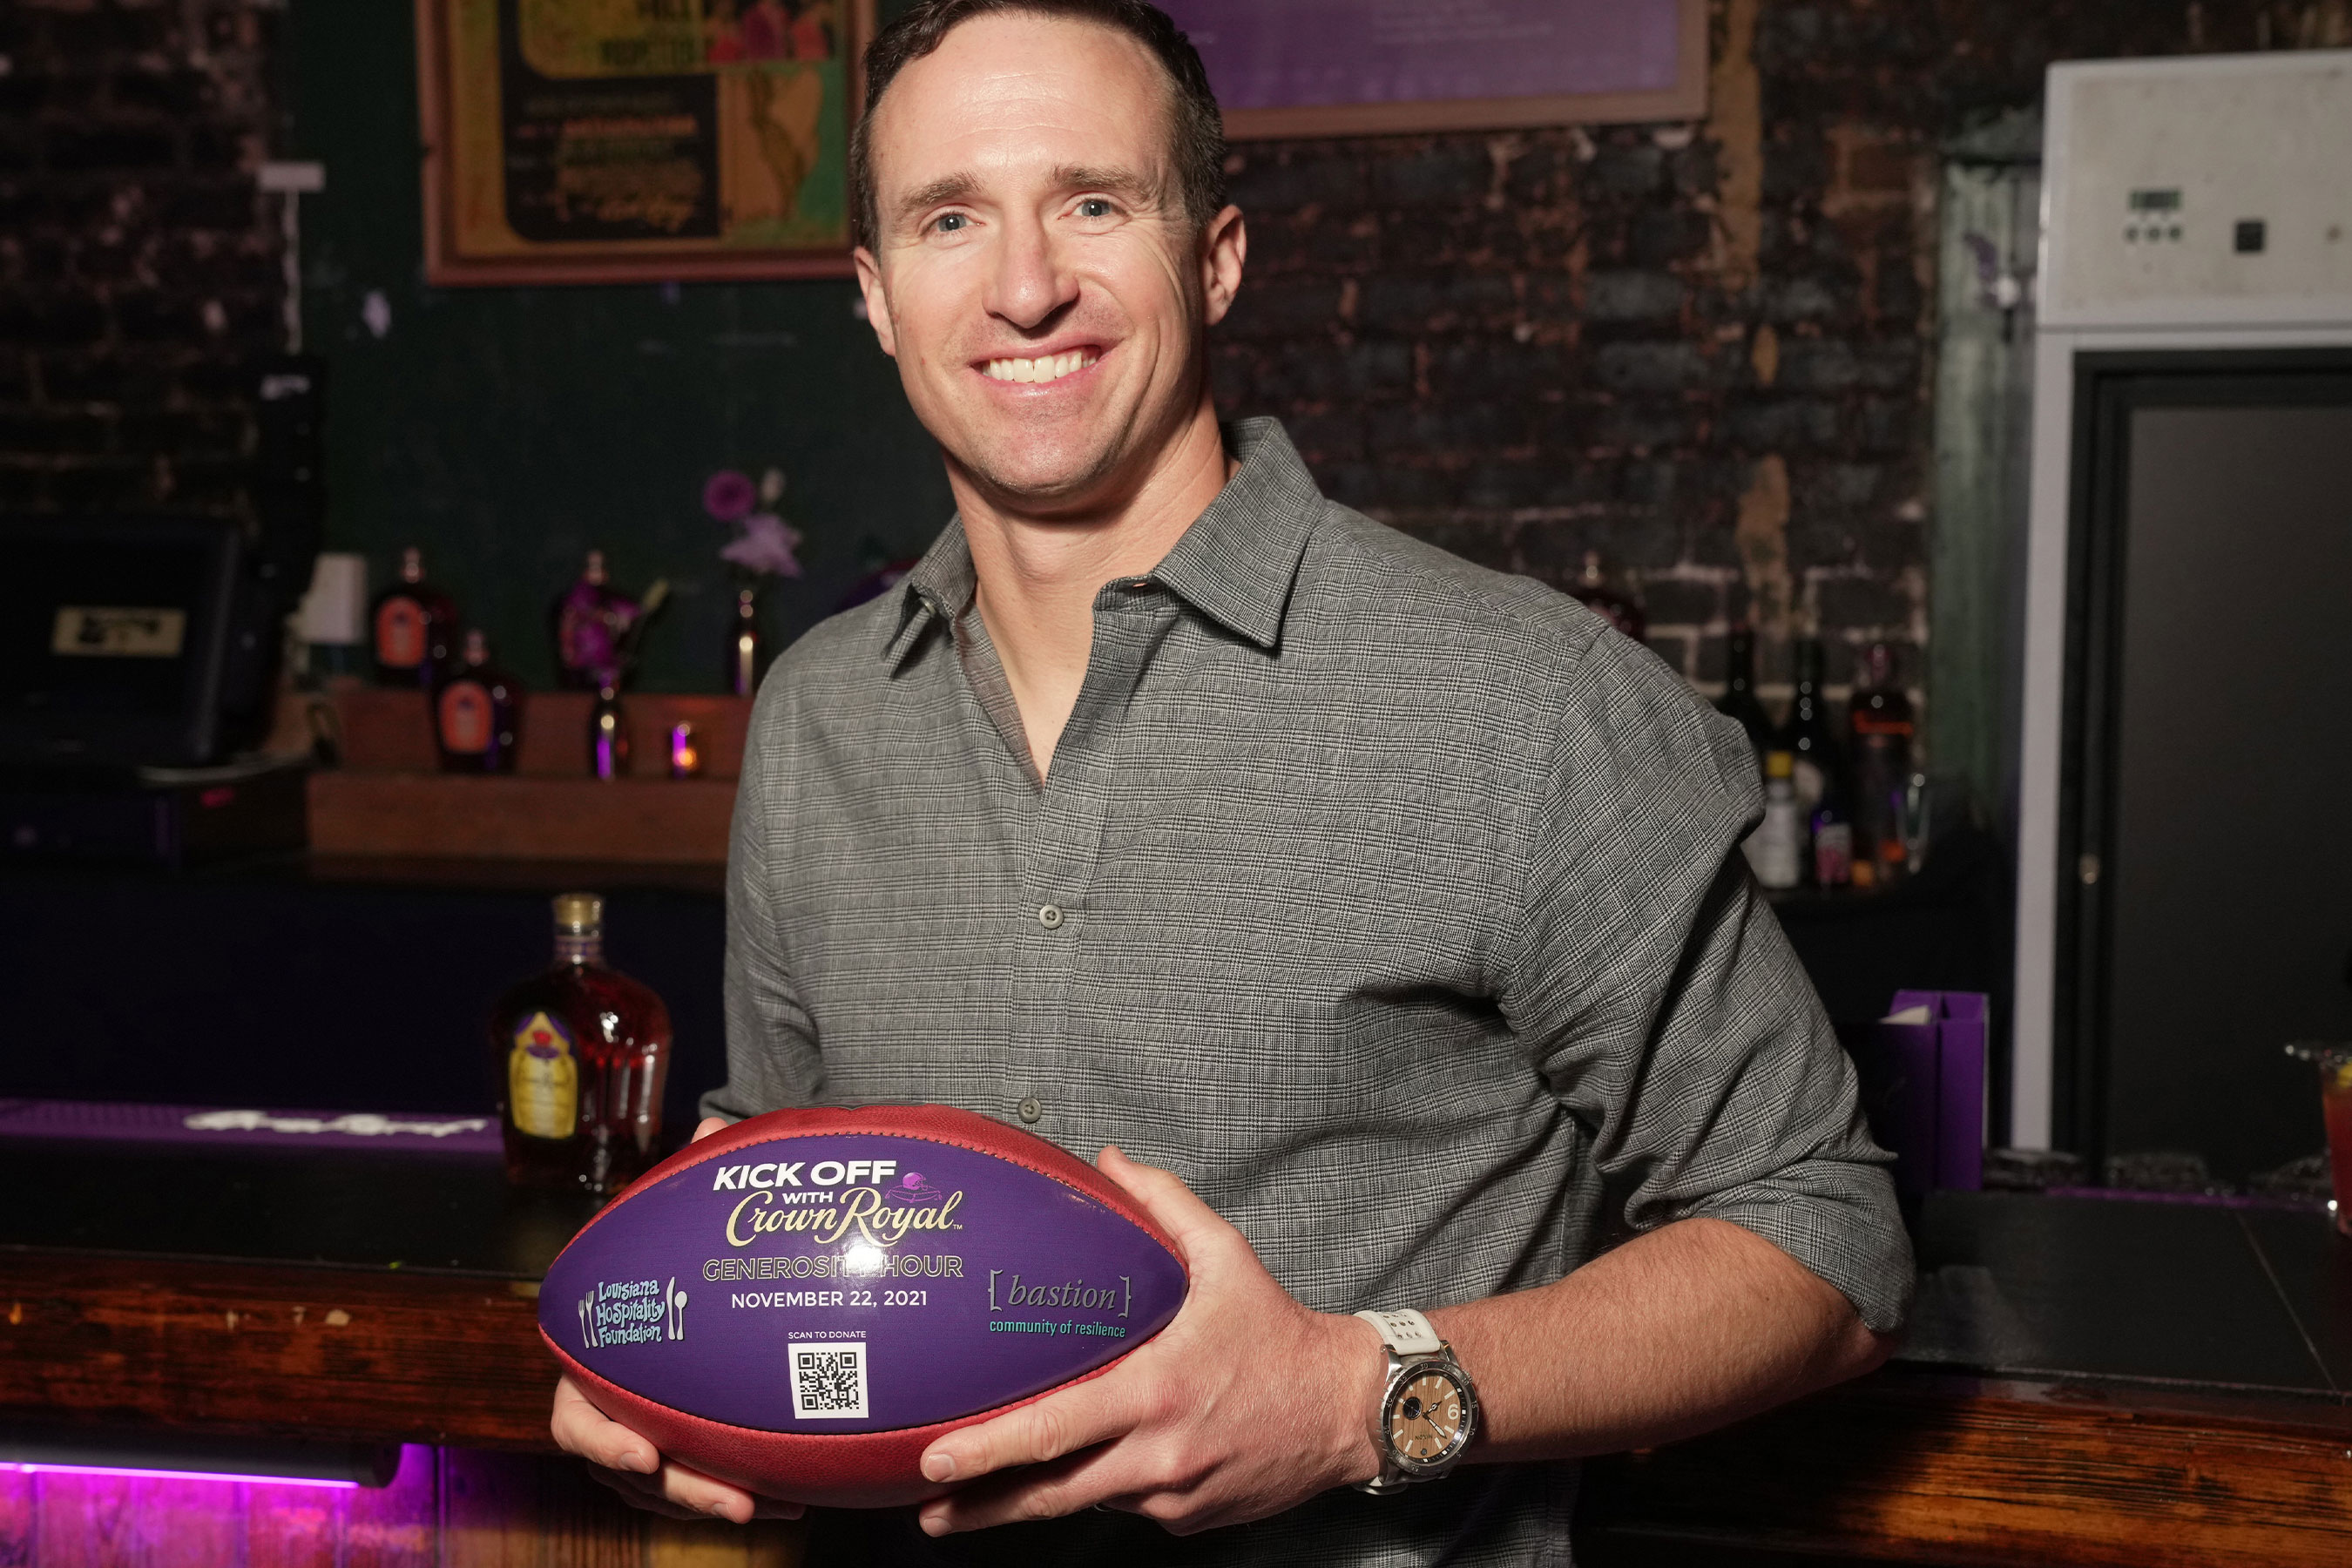 NFL legend Drew Brees gives back to the New Orleans hospitality and military community at the Crown Royal #GenerosityHour in New Orleans, LA.